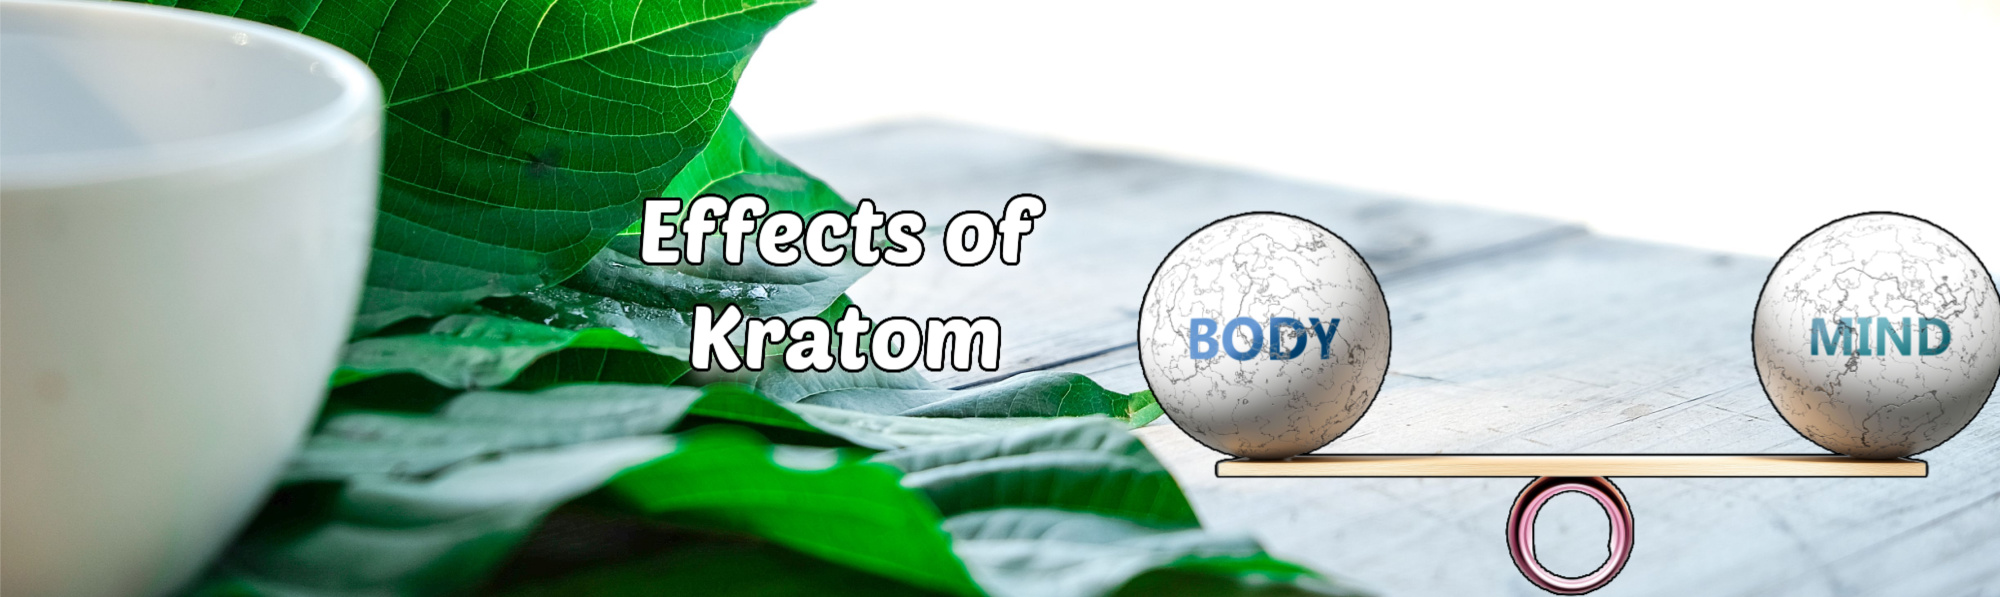 image of effects of kratom on body and mind